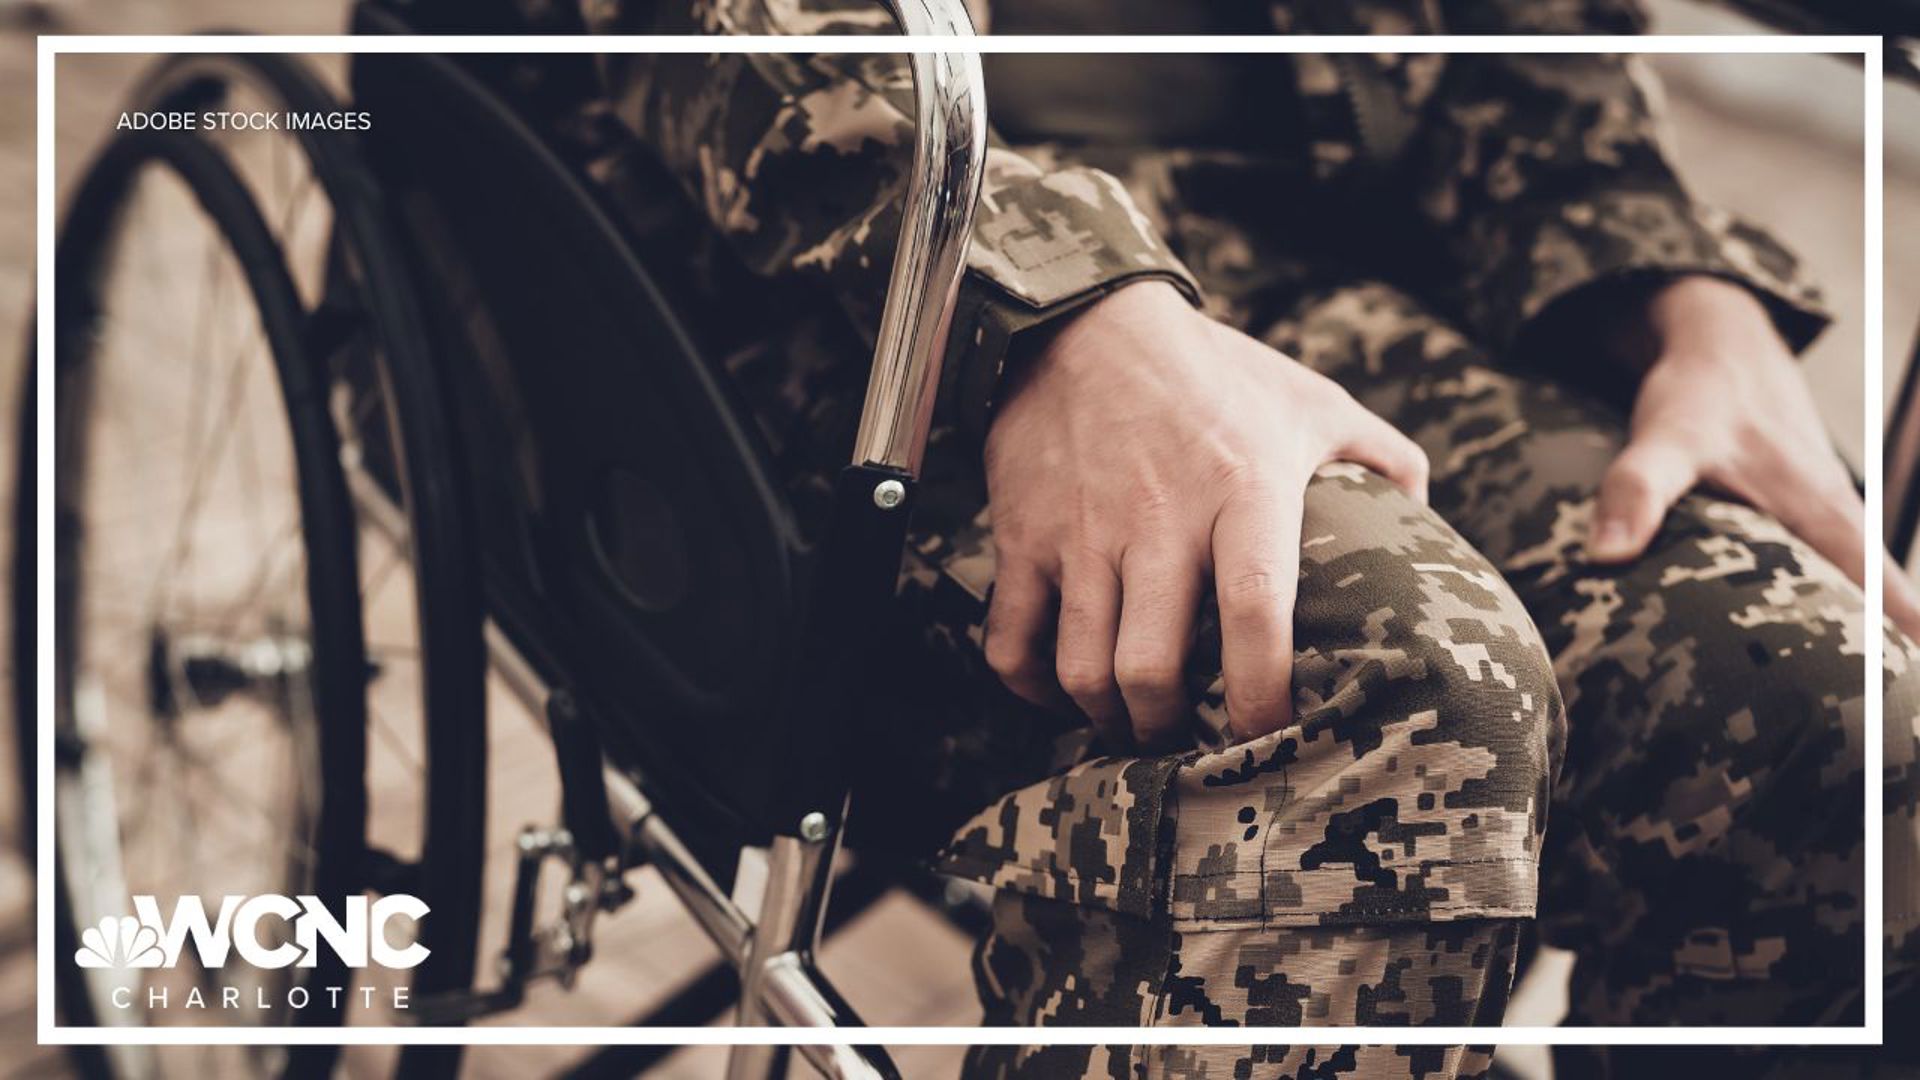 May is recognized as Military Caregiver Month, recognizing the importance caregivers have in serving the lives of veterans.